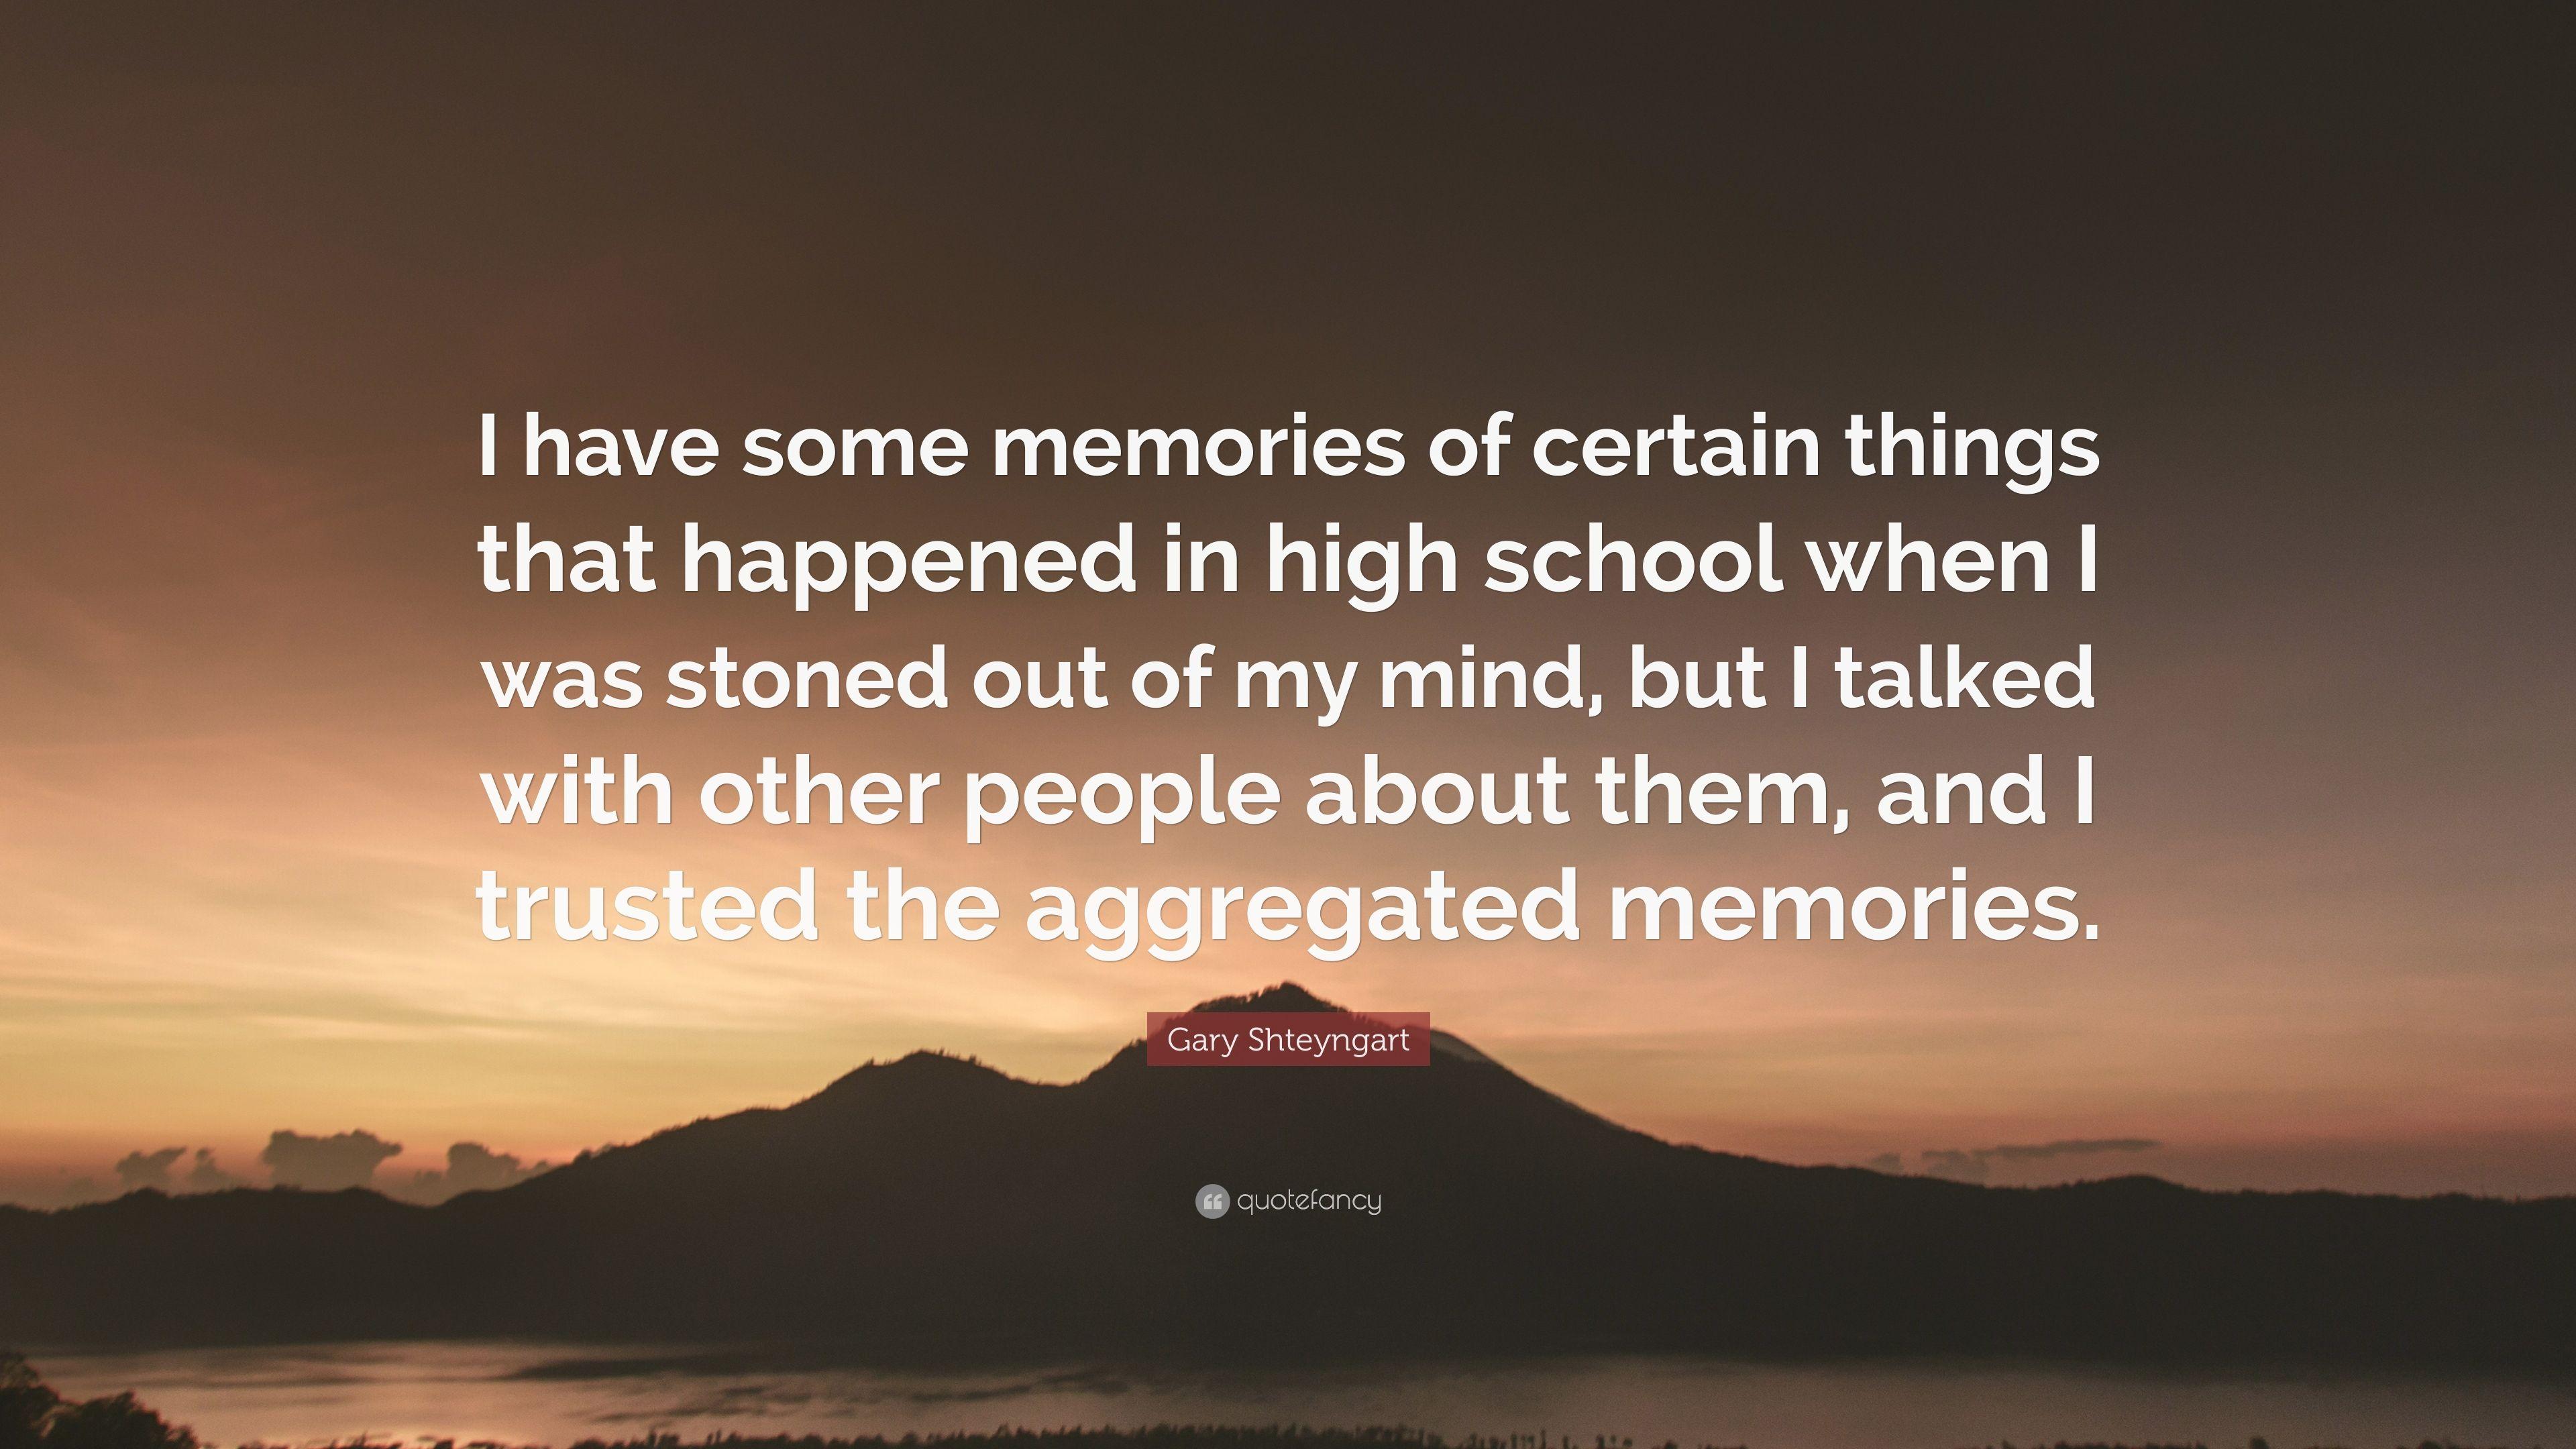 Gary Shteyngart Quote: “I have some memories of certain